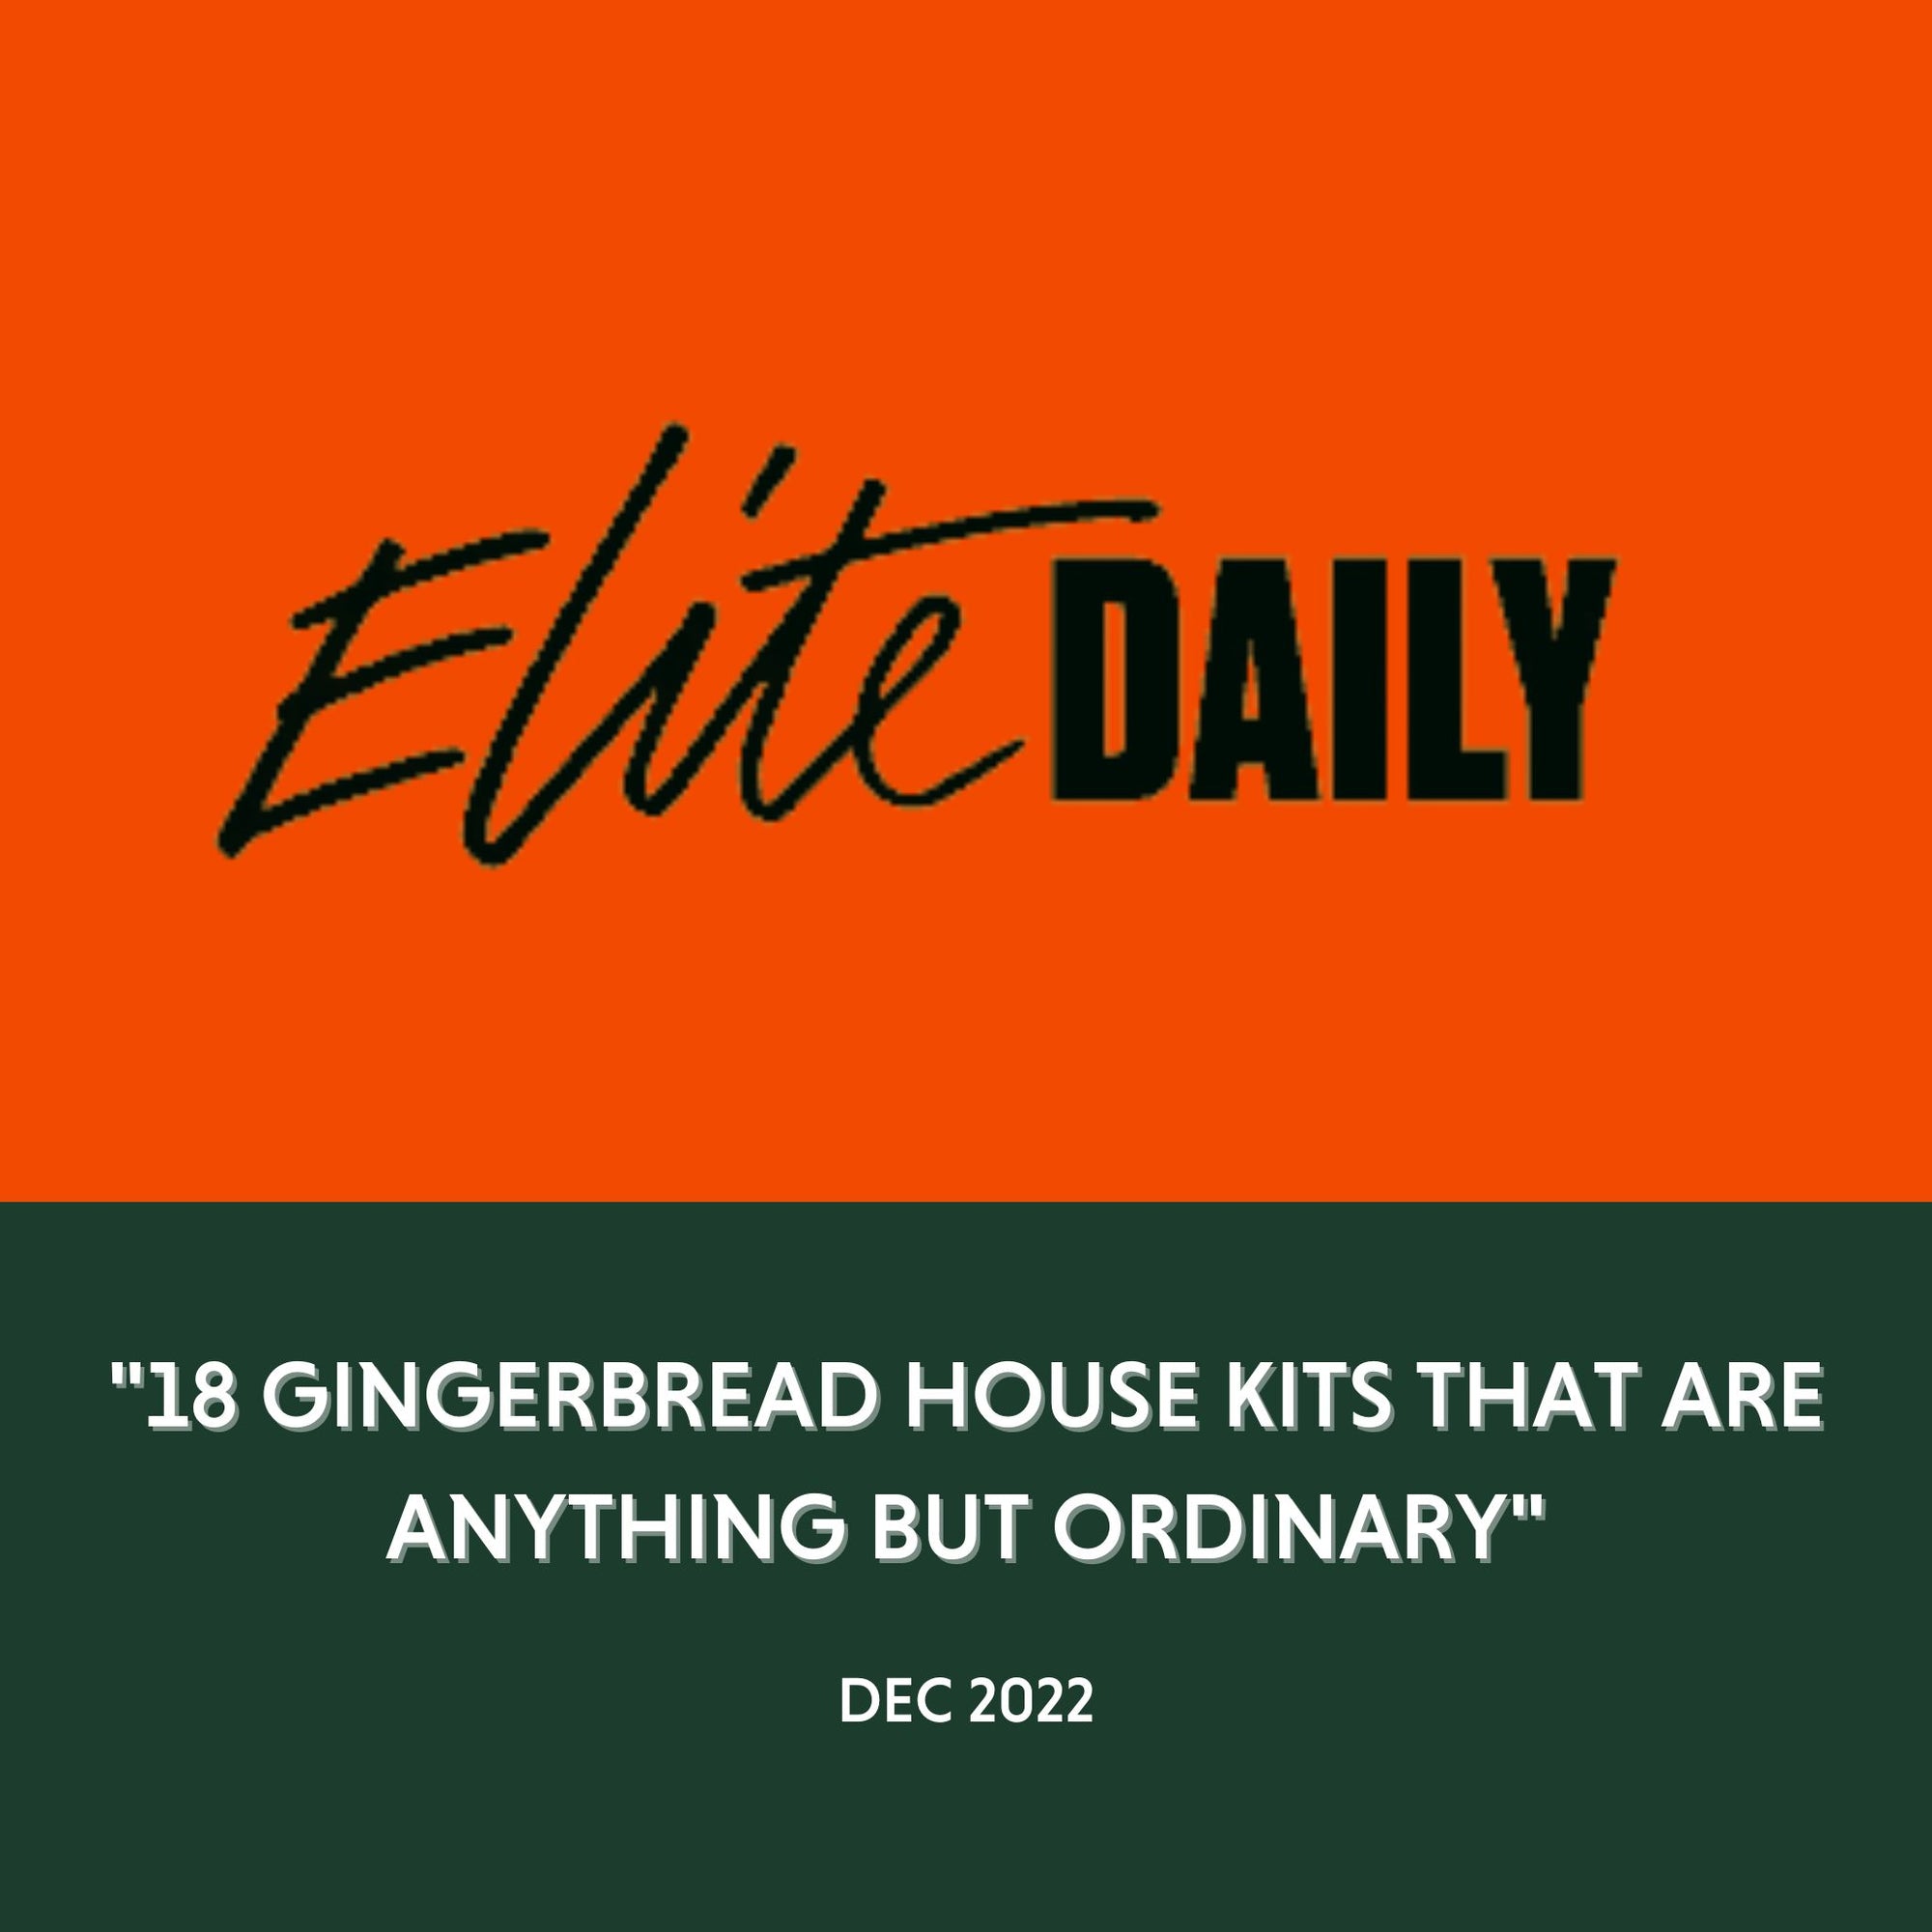 Elite Daily - "18 GINGERBREAD HOUSE KITS THAT ARE ANYTHING BUT ORDINARY" - Dec 2022